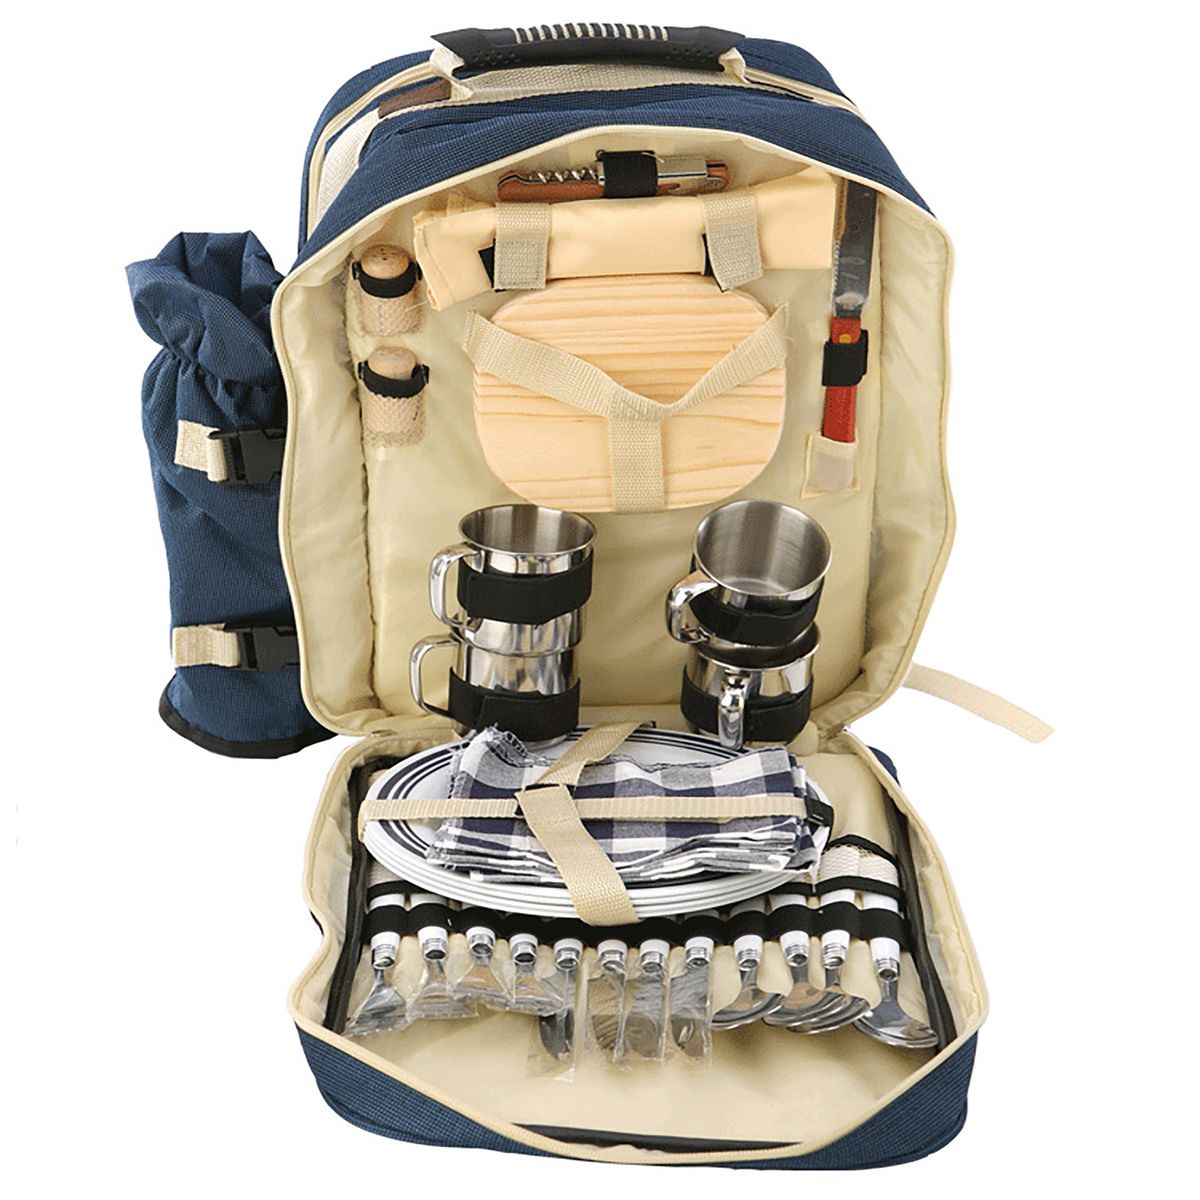 Heartdeco All-in-One Complete Cutlery Set Camping Picnic Backpack for 4